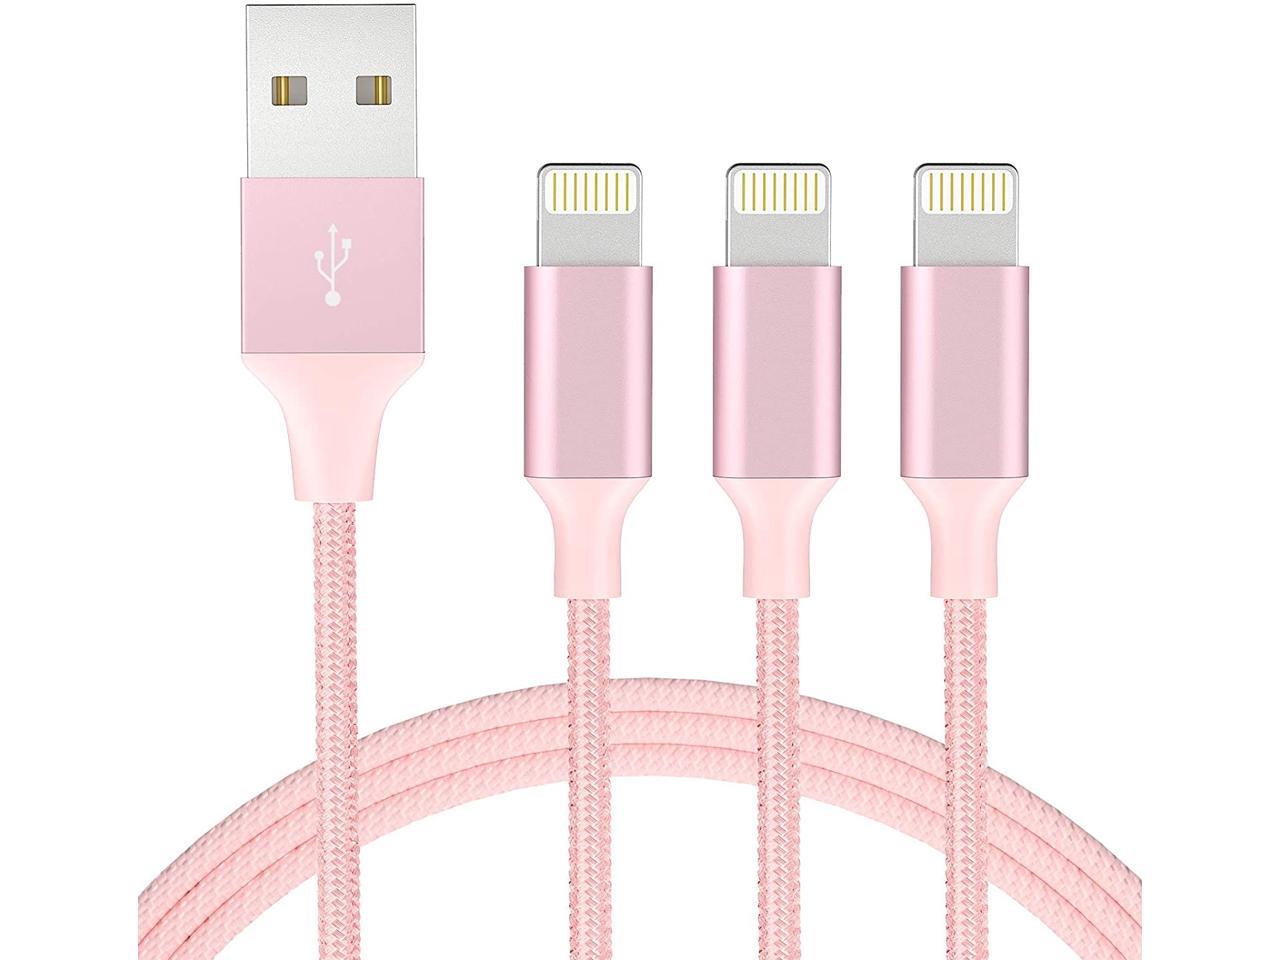 Fantany 6.6ft Lightning to USB C Fast Charging&Sync Cable Compatible with iPhone 11,11 Pro,11 Pro Max,XS,XS Max,XR,X,8,8 Plus,iPad,Airpods MFi Certified Blue-2Pack USB C to Lightning Cable,